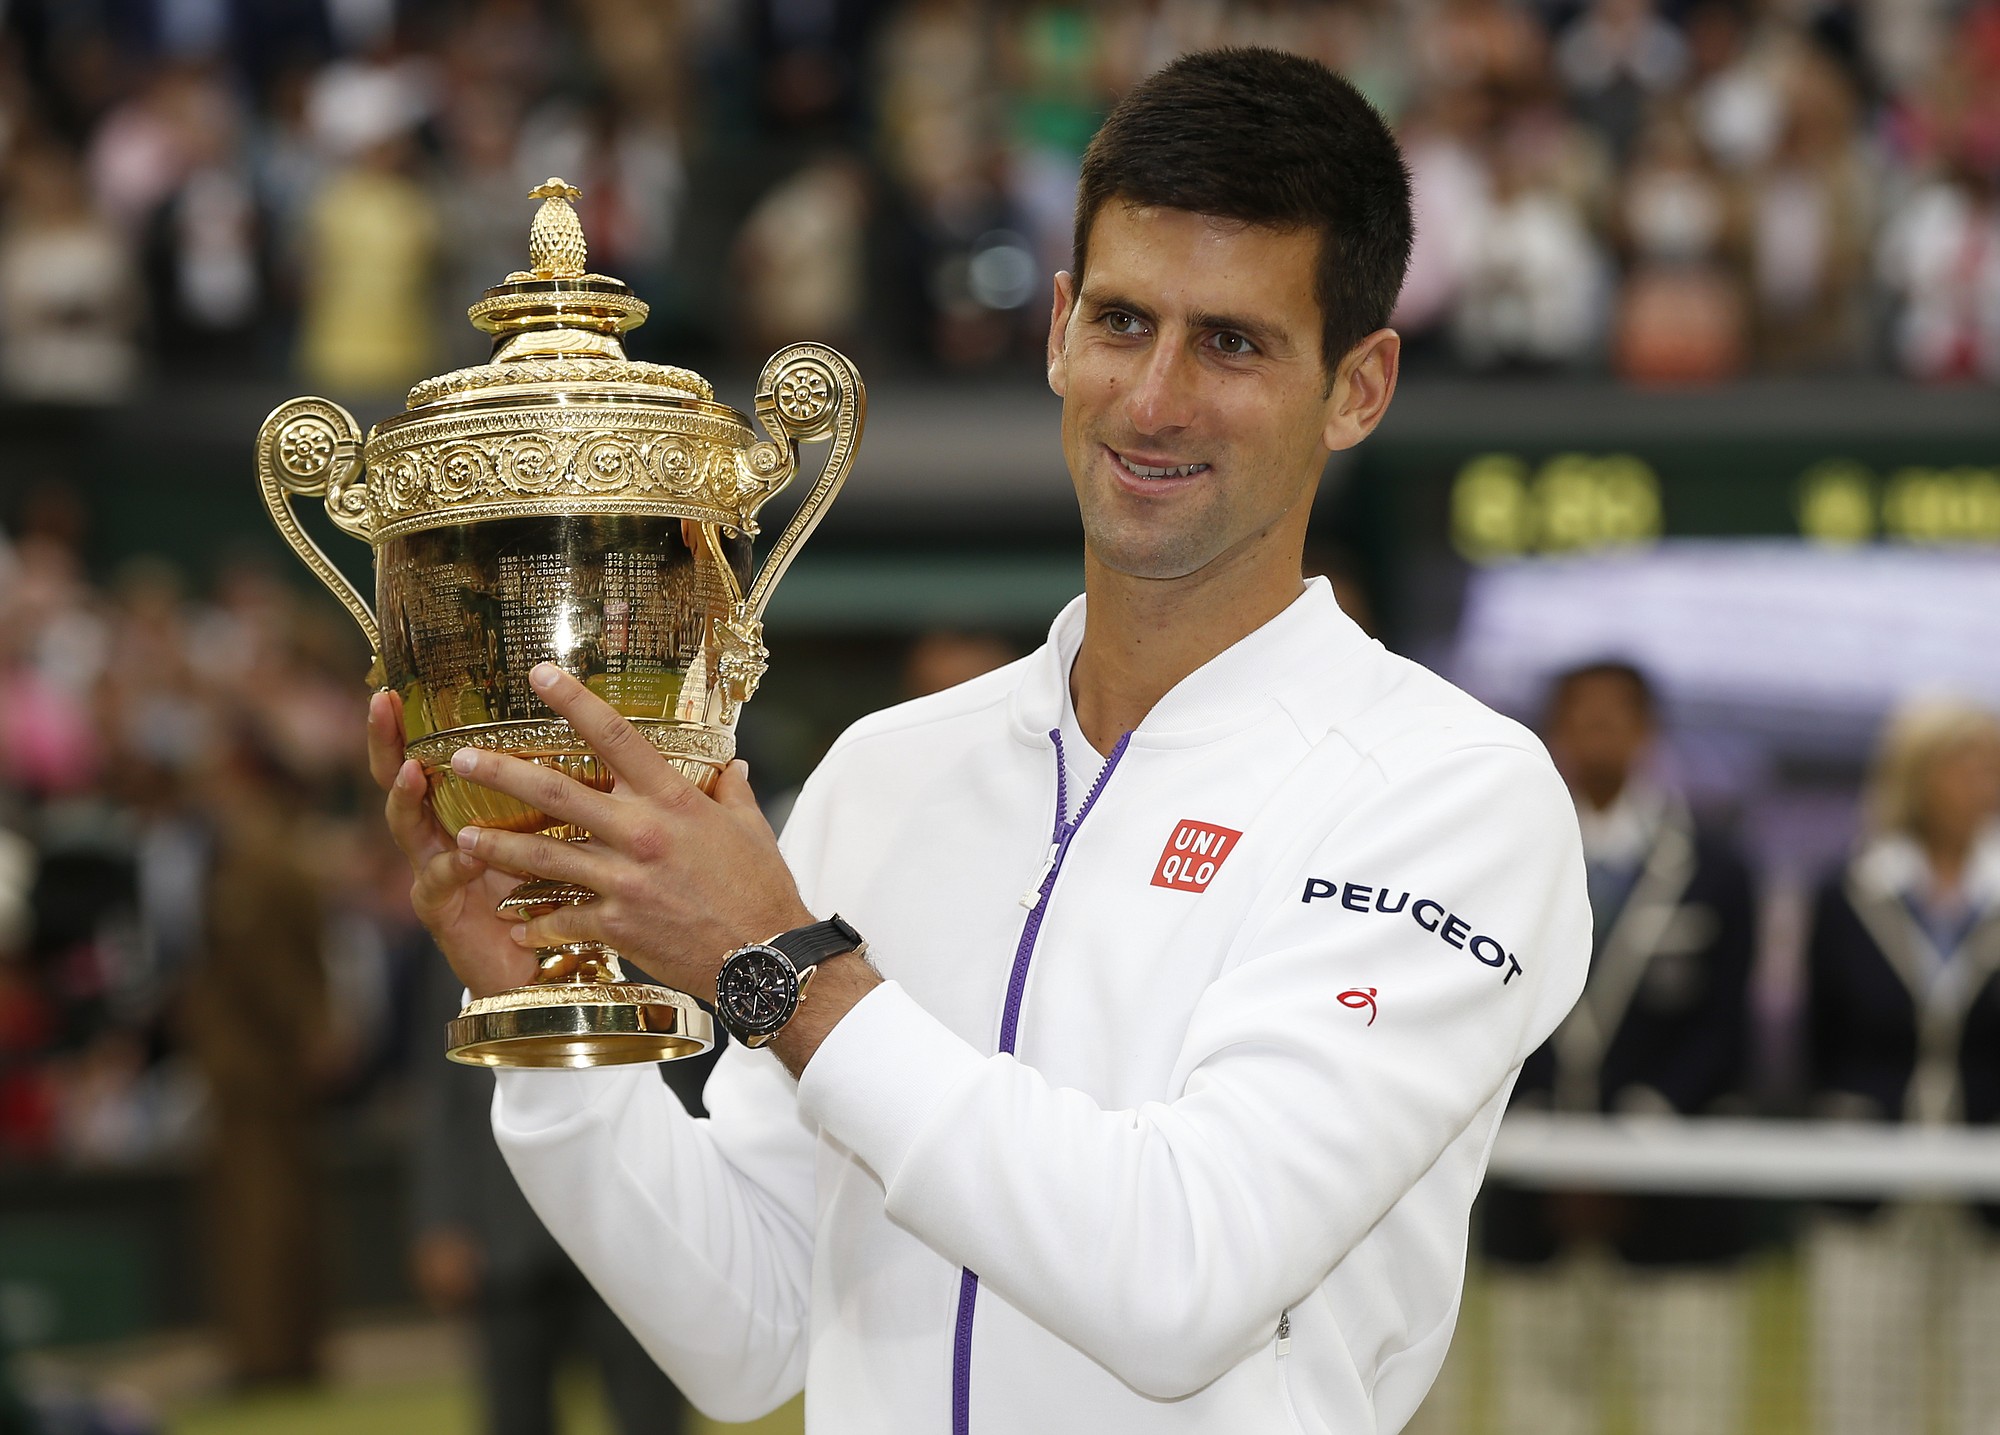 Novak Djokovic of Serbia holds the trophy after winning the men's singles final against Roger Federer of Switzerland at the All England Lawn Tennis Championships in Wimbledon, London, Sunday July 12, 2015.